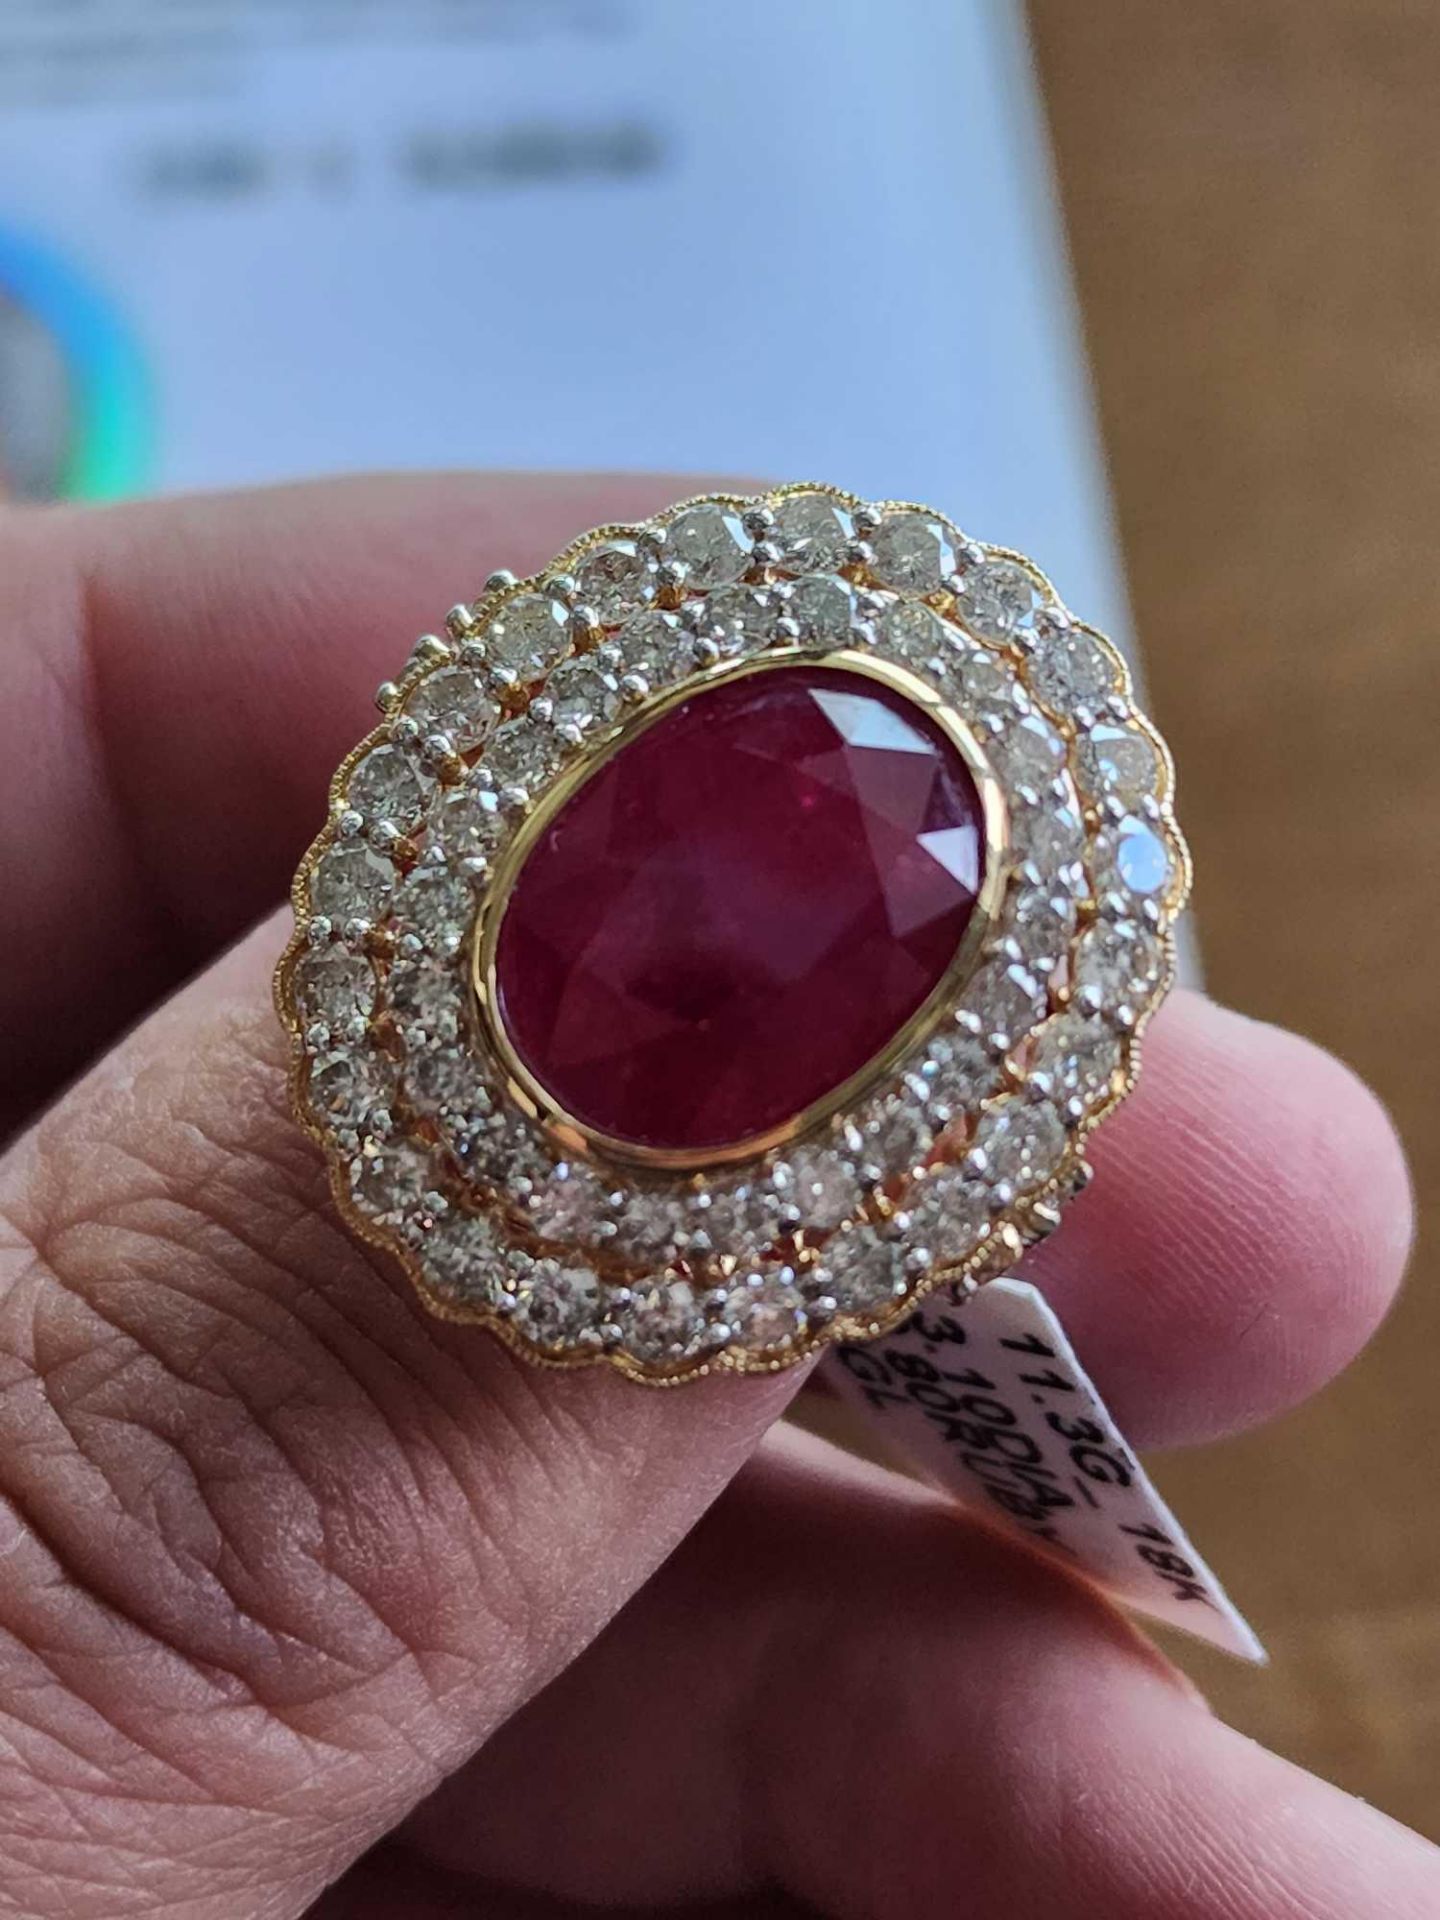 18KT Gold Ruby and Diamond Ring, 9.80 cts Ruby, 3.10 cts Diamond - Image 2 of 6